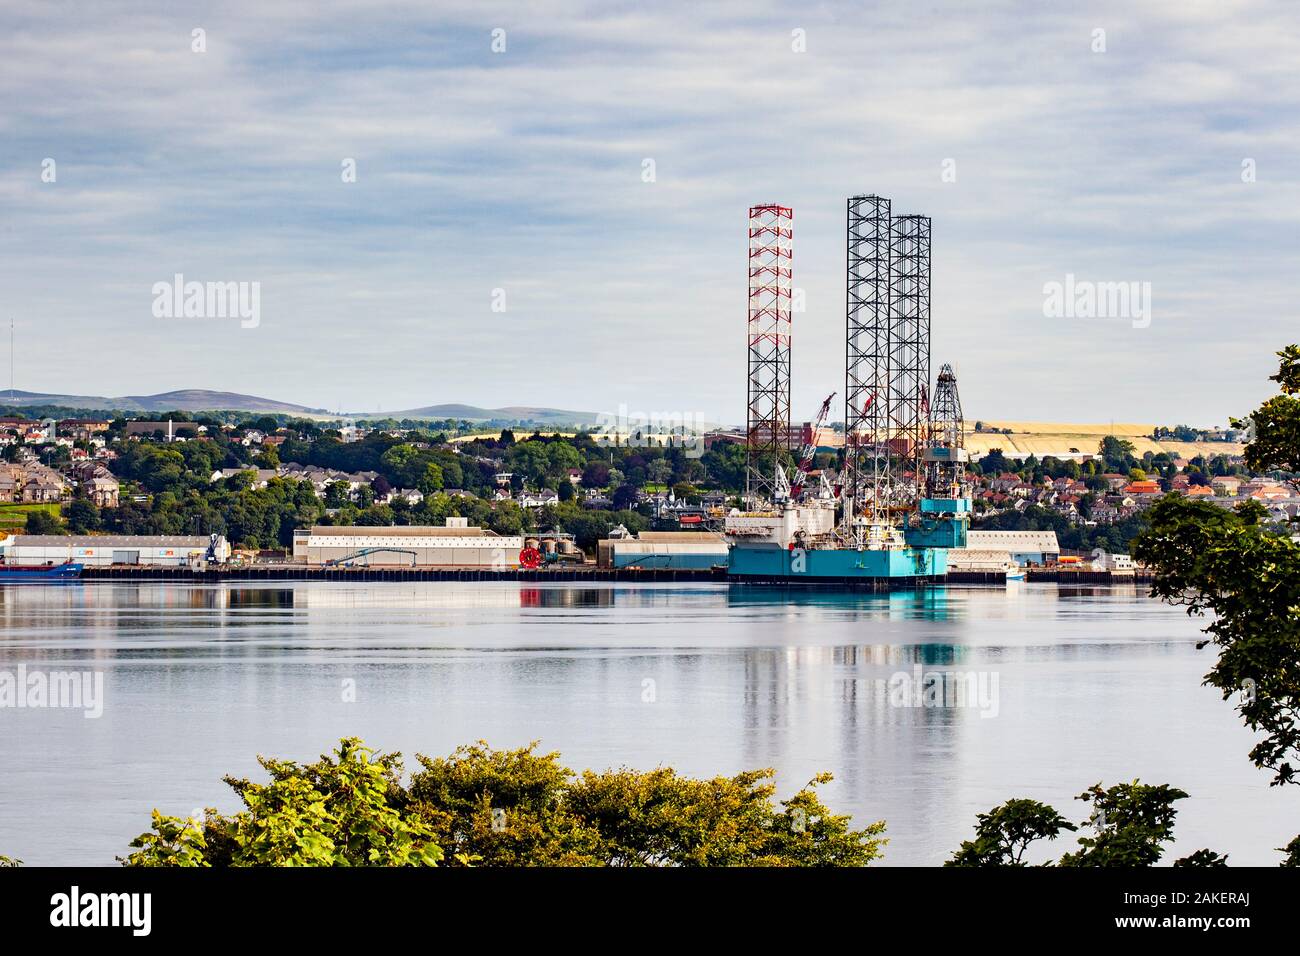 Dundee waterfront, Tayside, Scotland.  Rowan Stavanger a jack-up rig at Dundee Docks. The Rowan Stavanger jack-up oil rig is an impressive sight at its port berth at Prince Charles Wharf in Dundee. Stock Photo